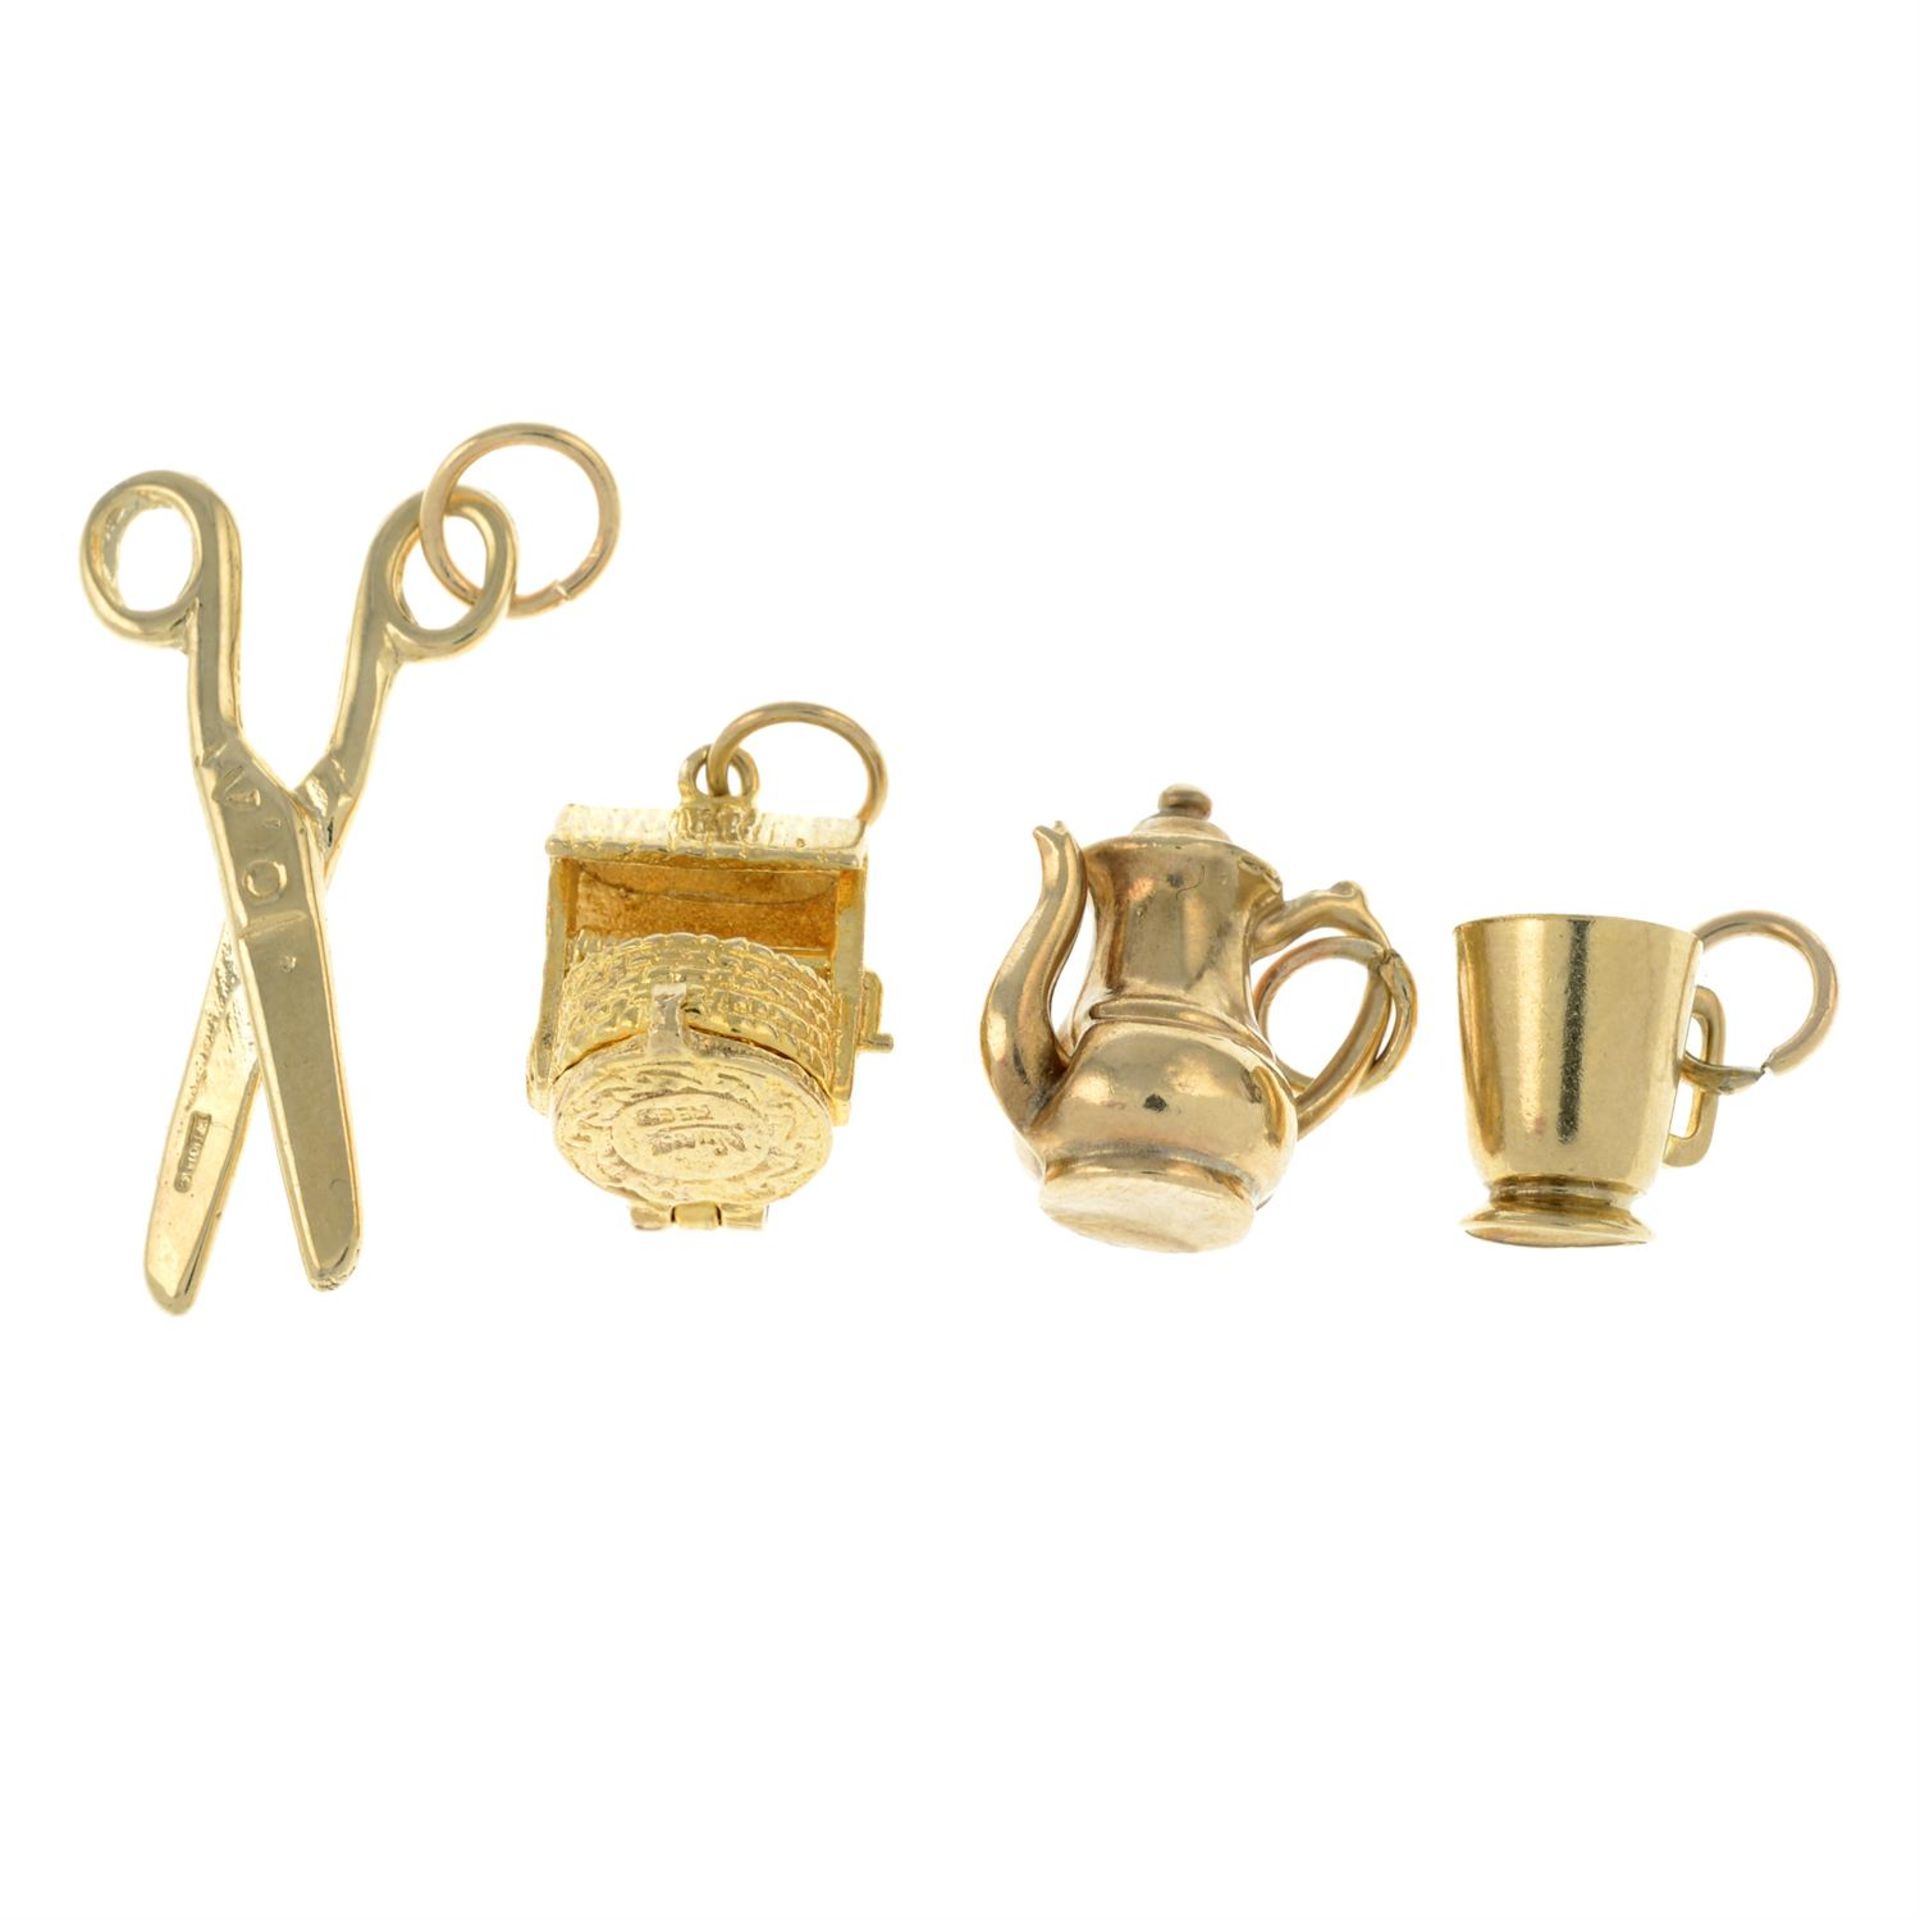 Four 9ct gold charms.